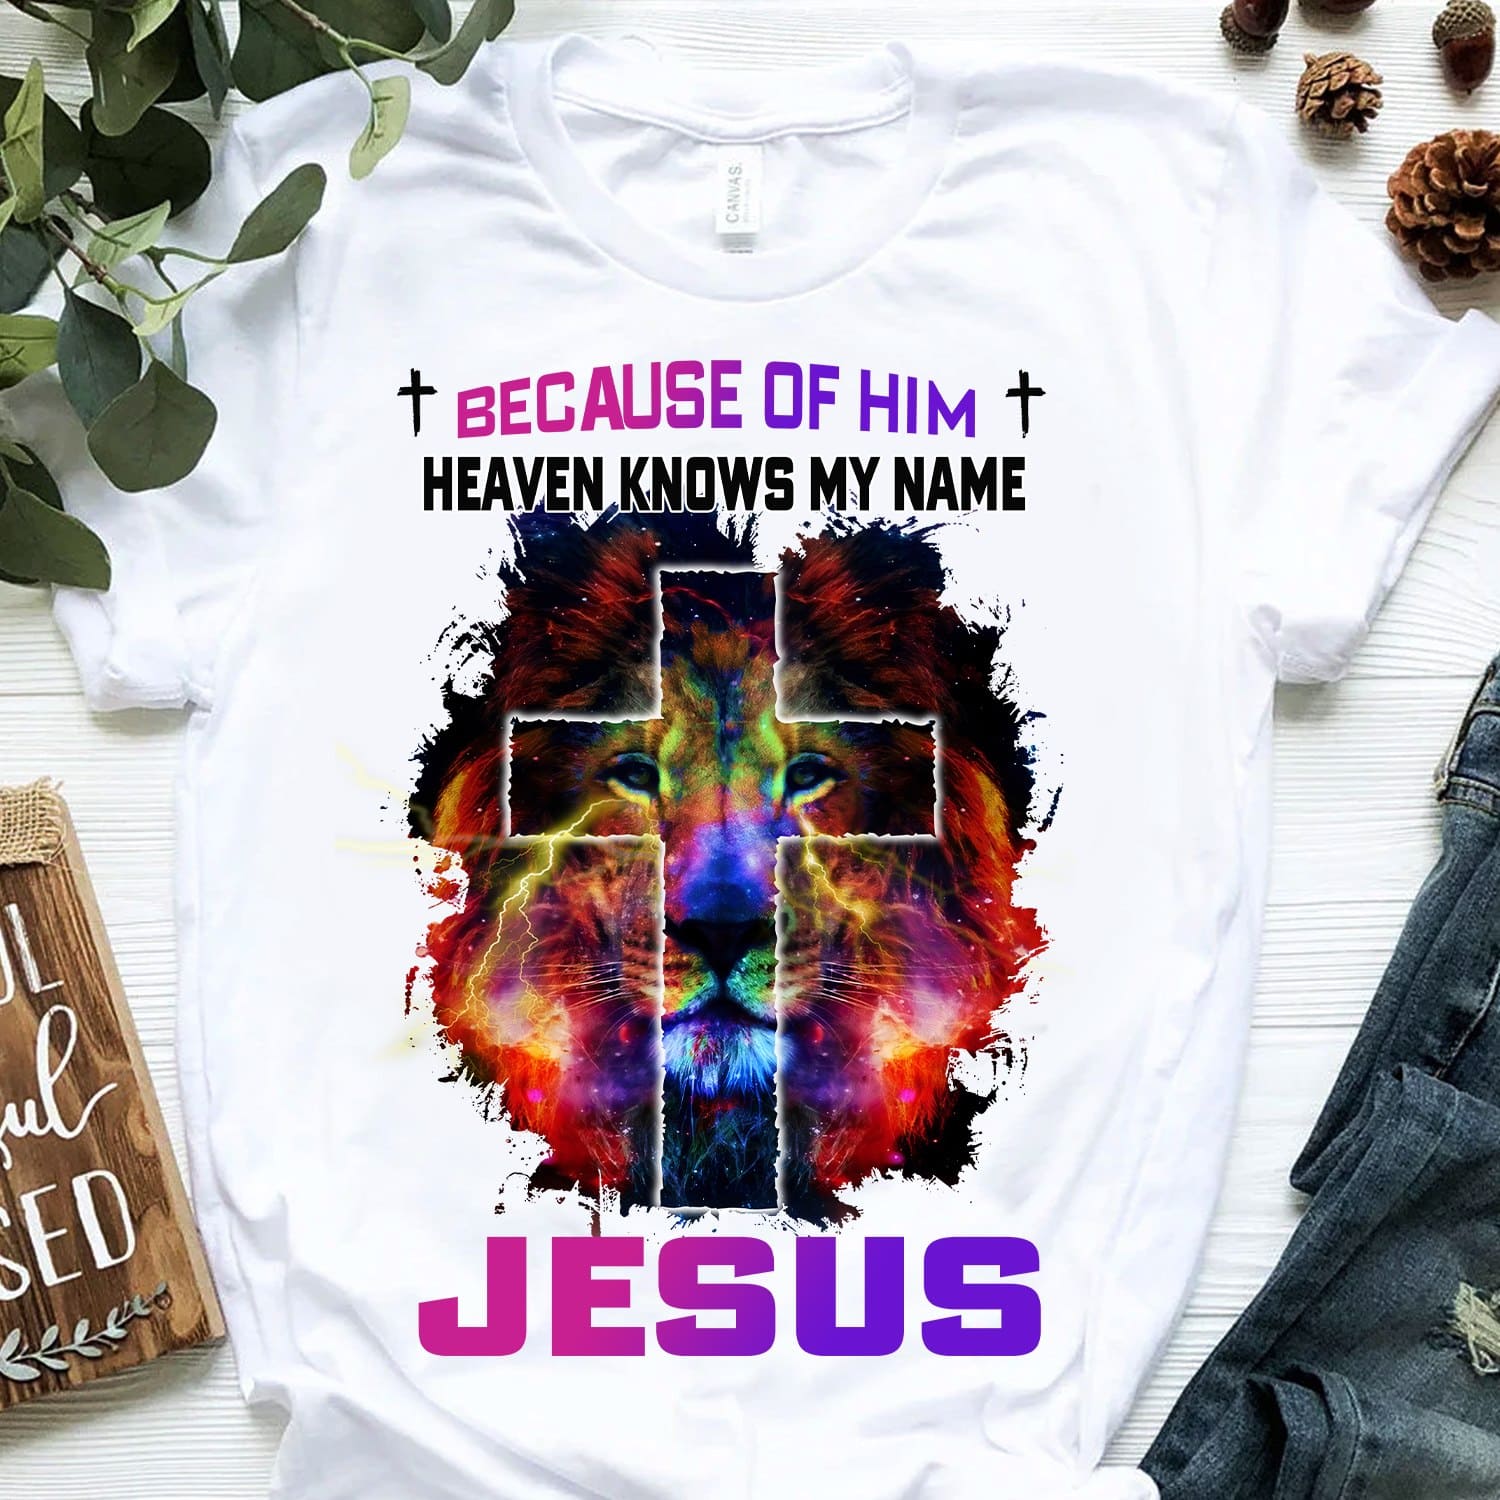 Because of him, haven knows my name - Believe in Jesus, Lion the God cross